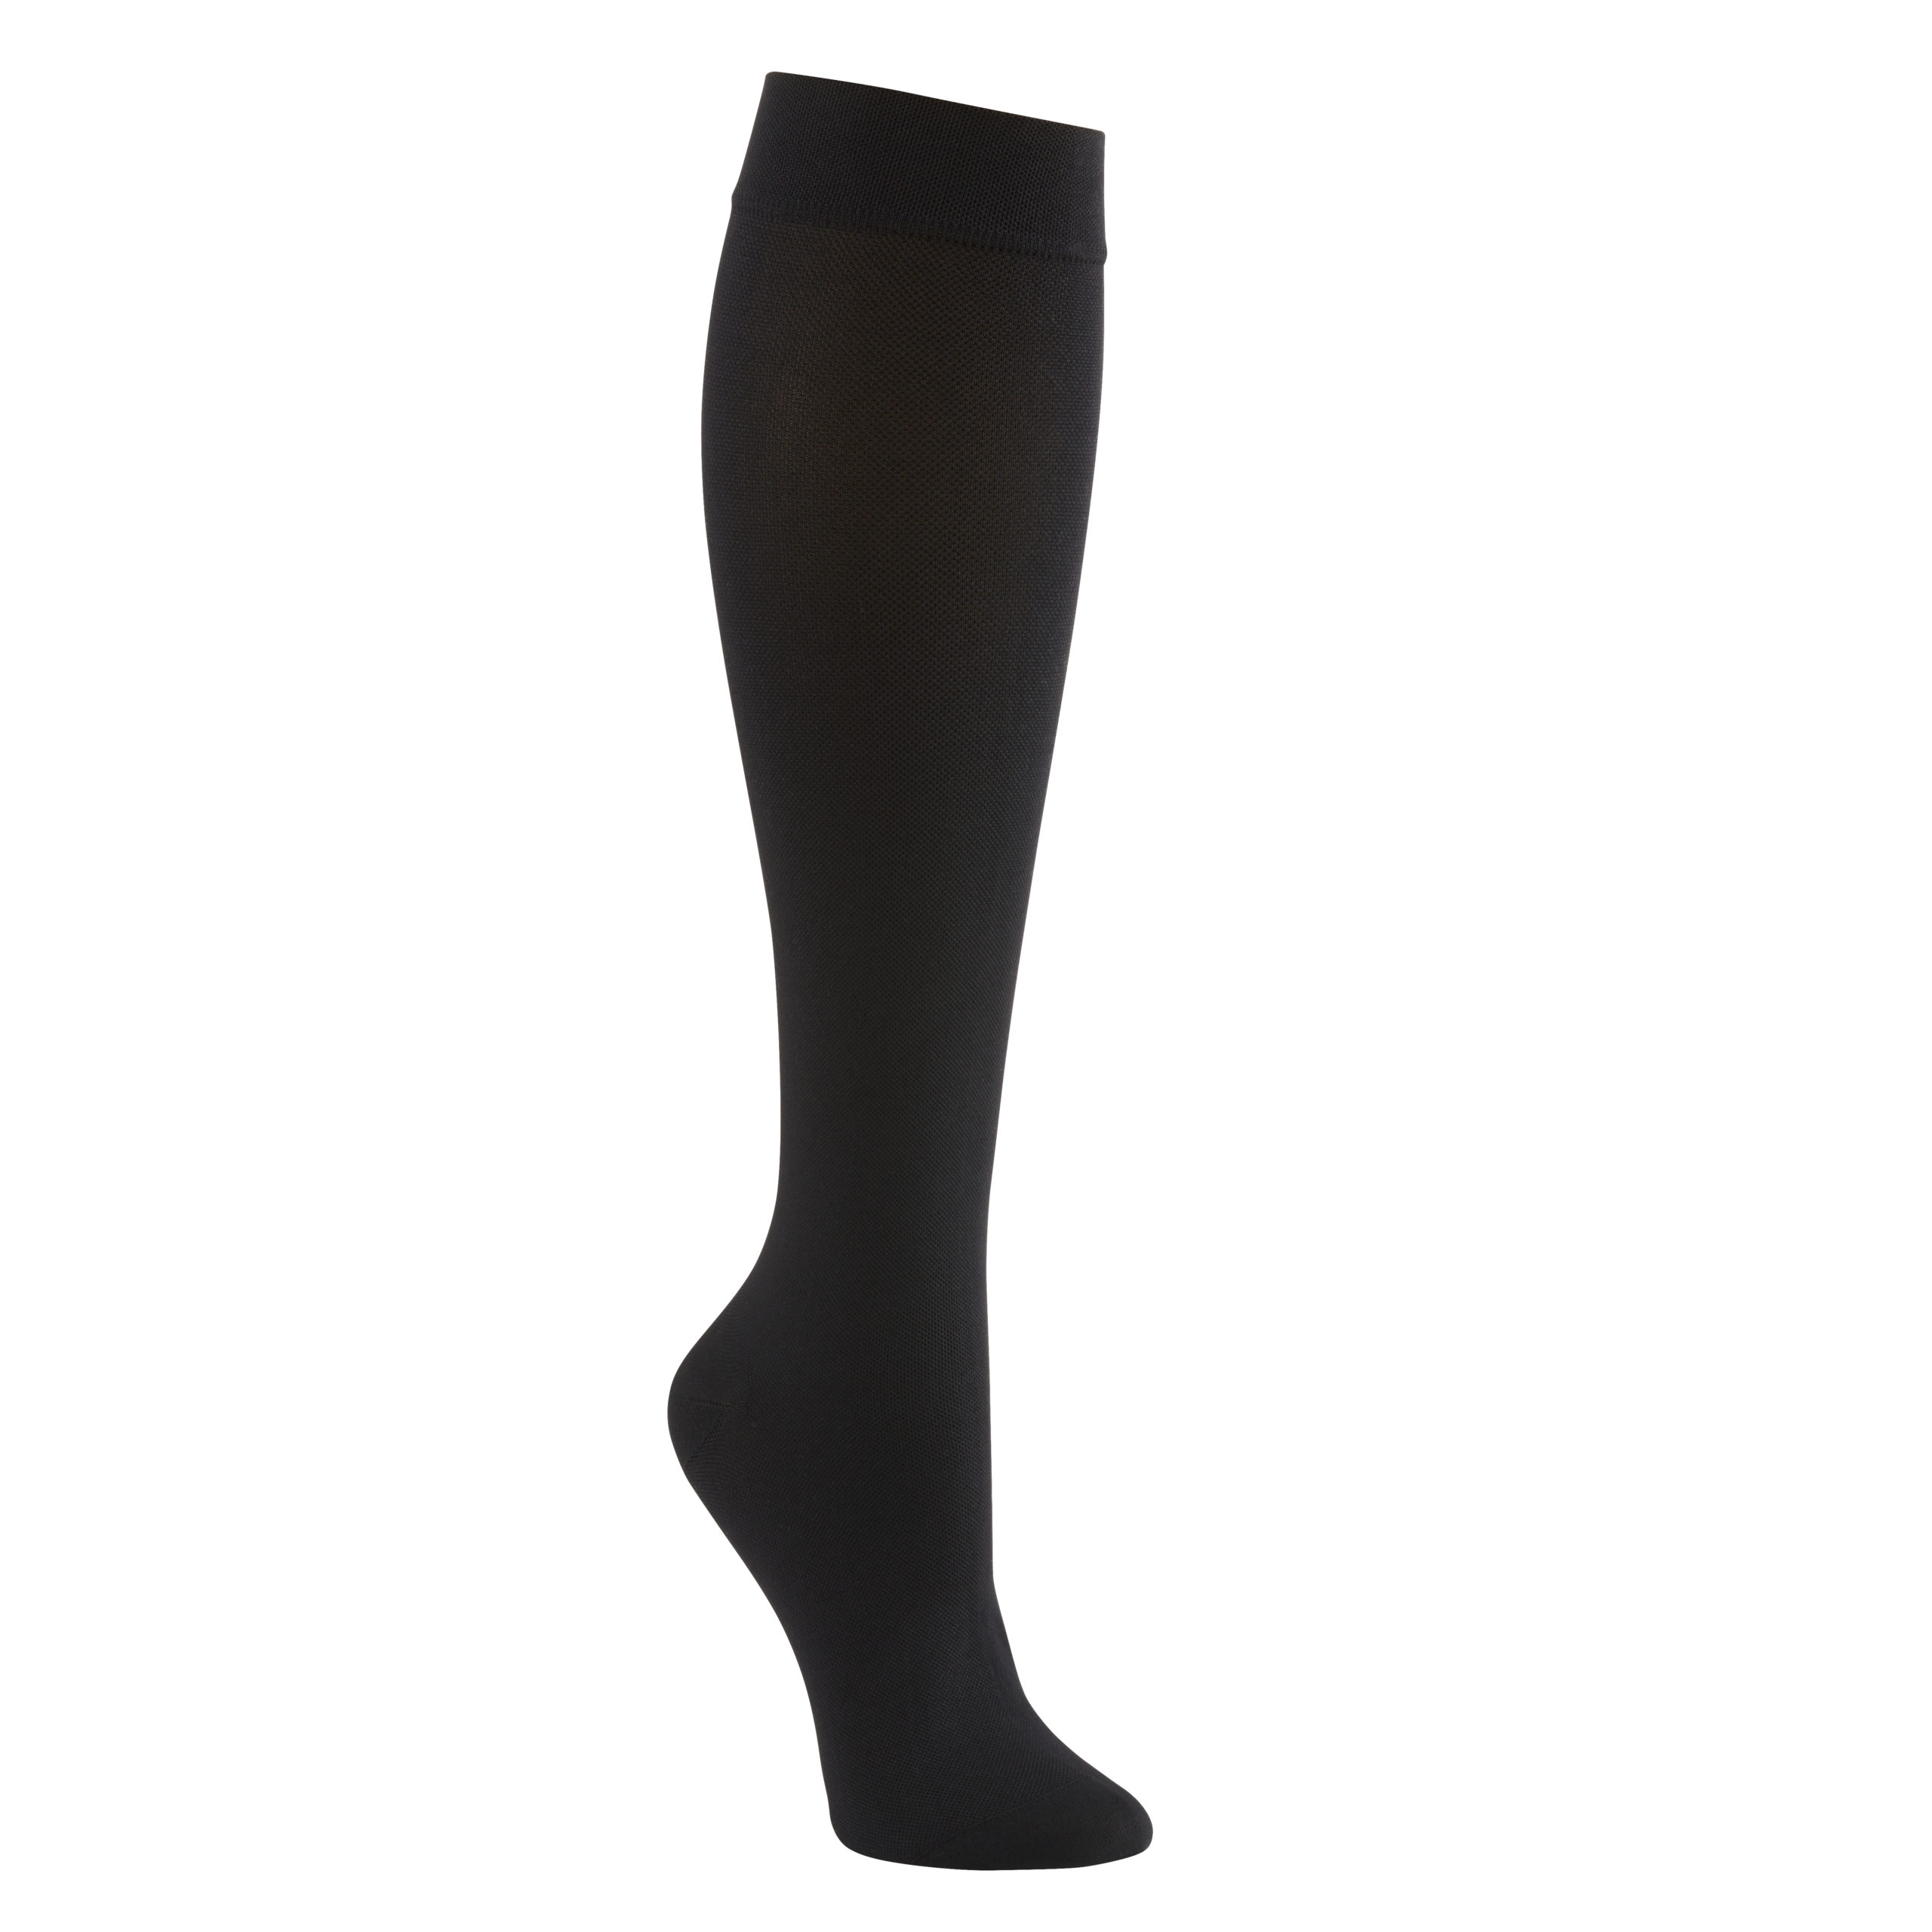 Supporo Opaque Knee-high Compression Socks, 20-25 mmHg